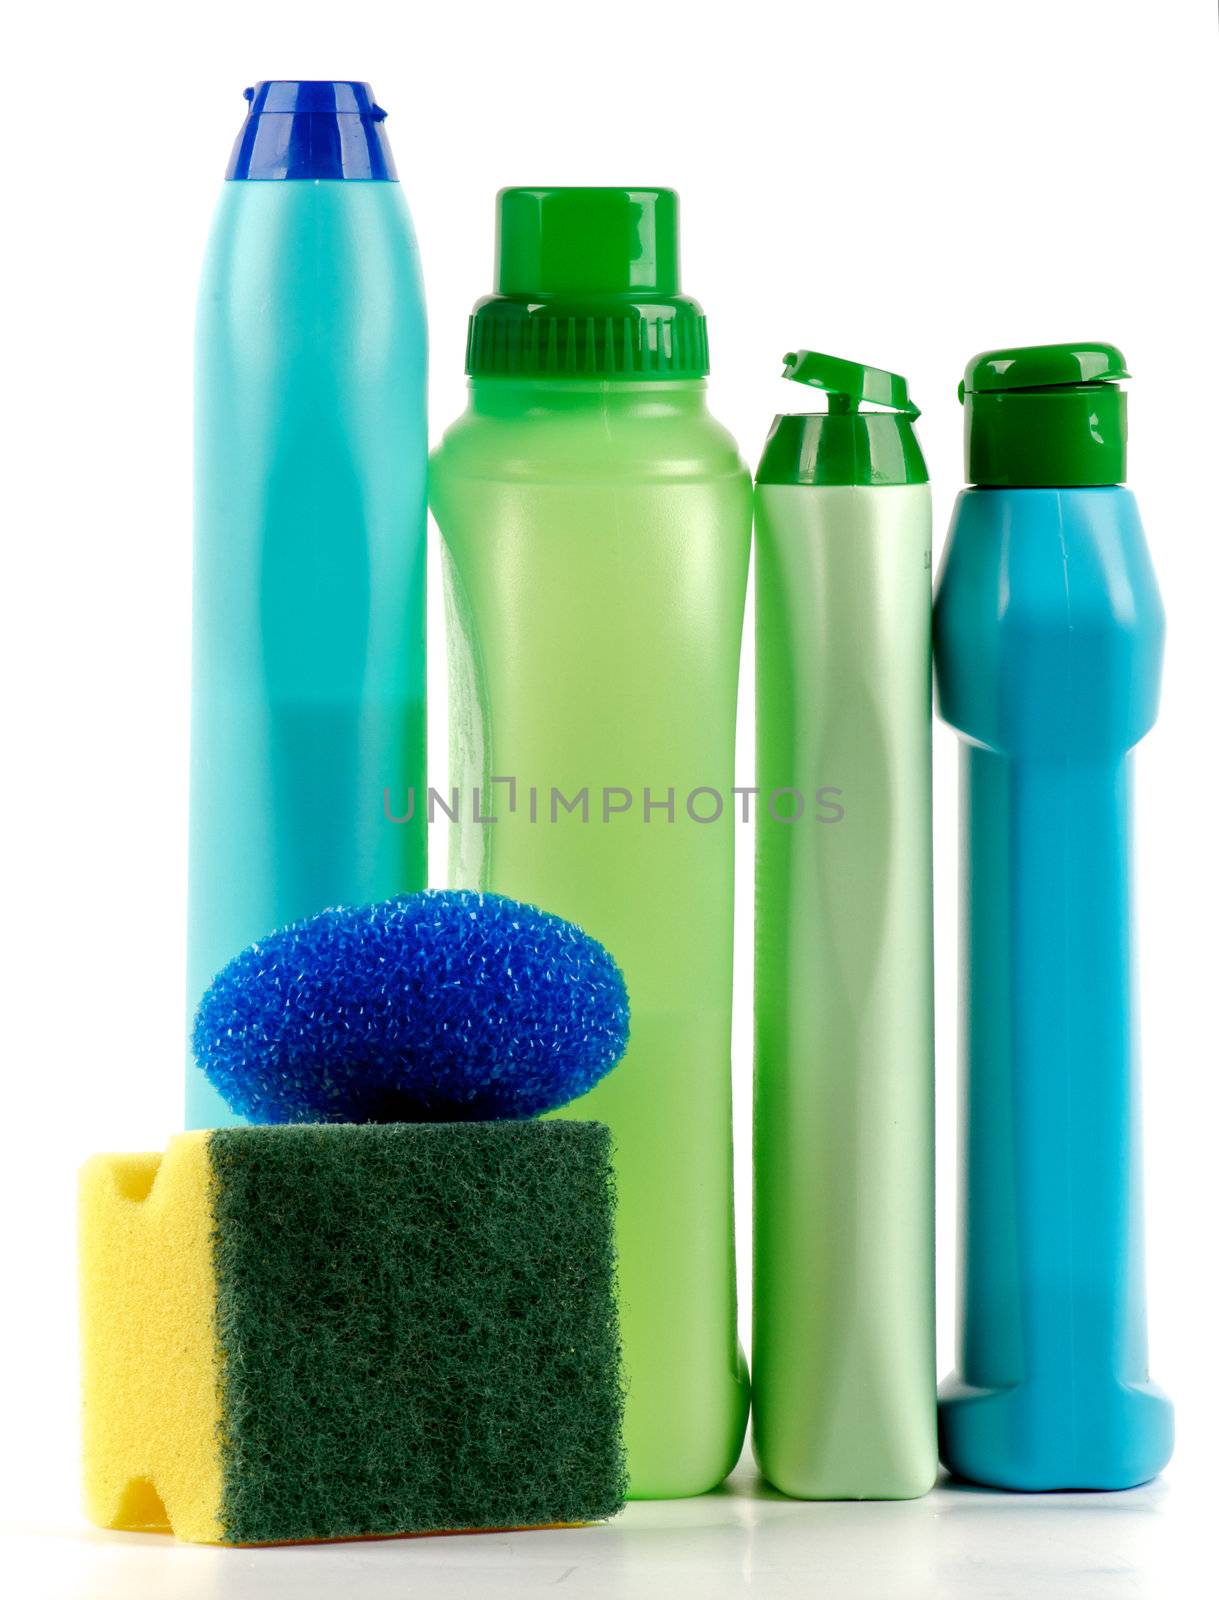 Cleaning Supplies by zhekos